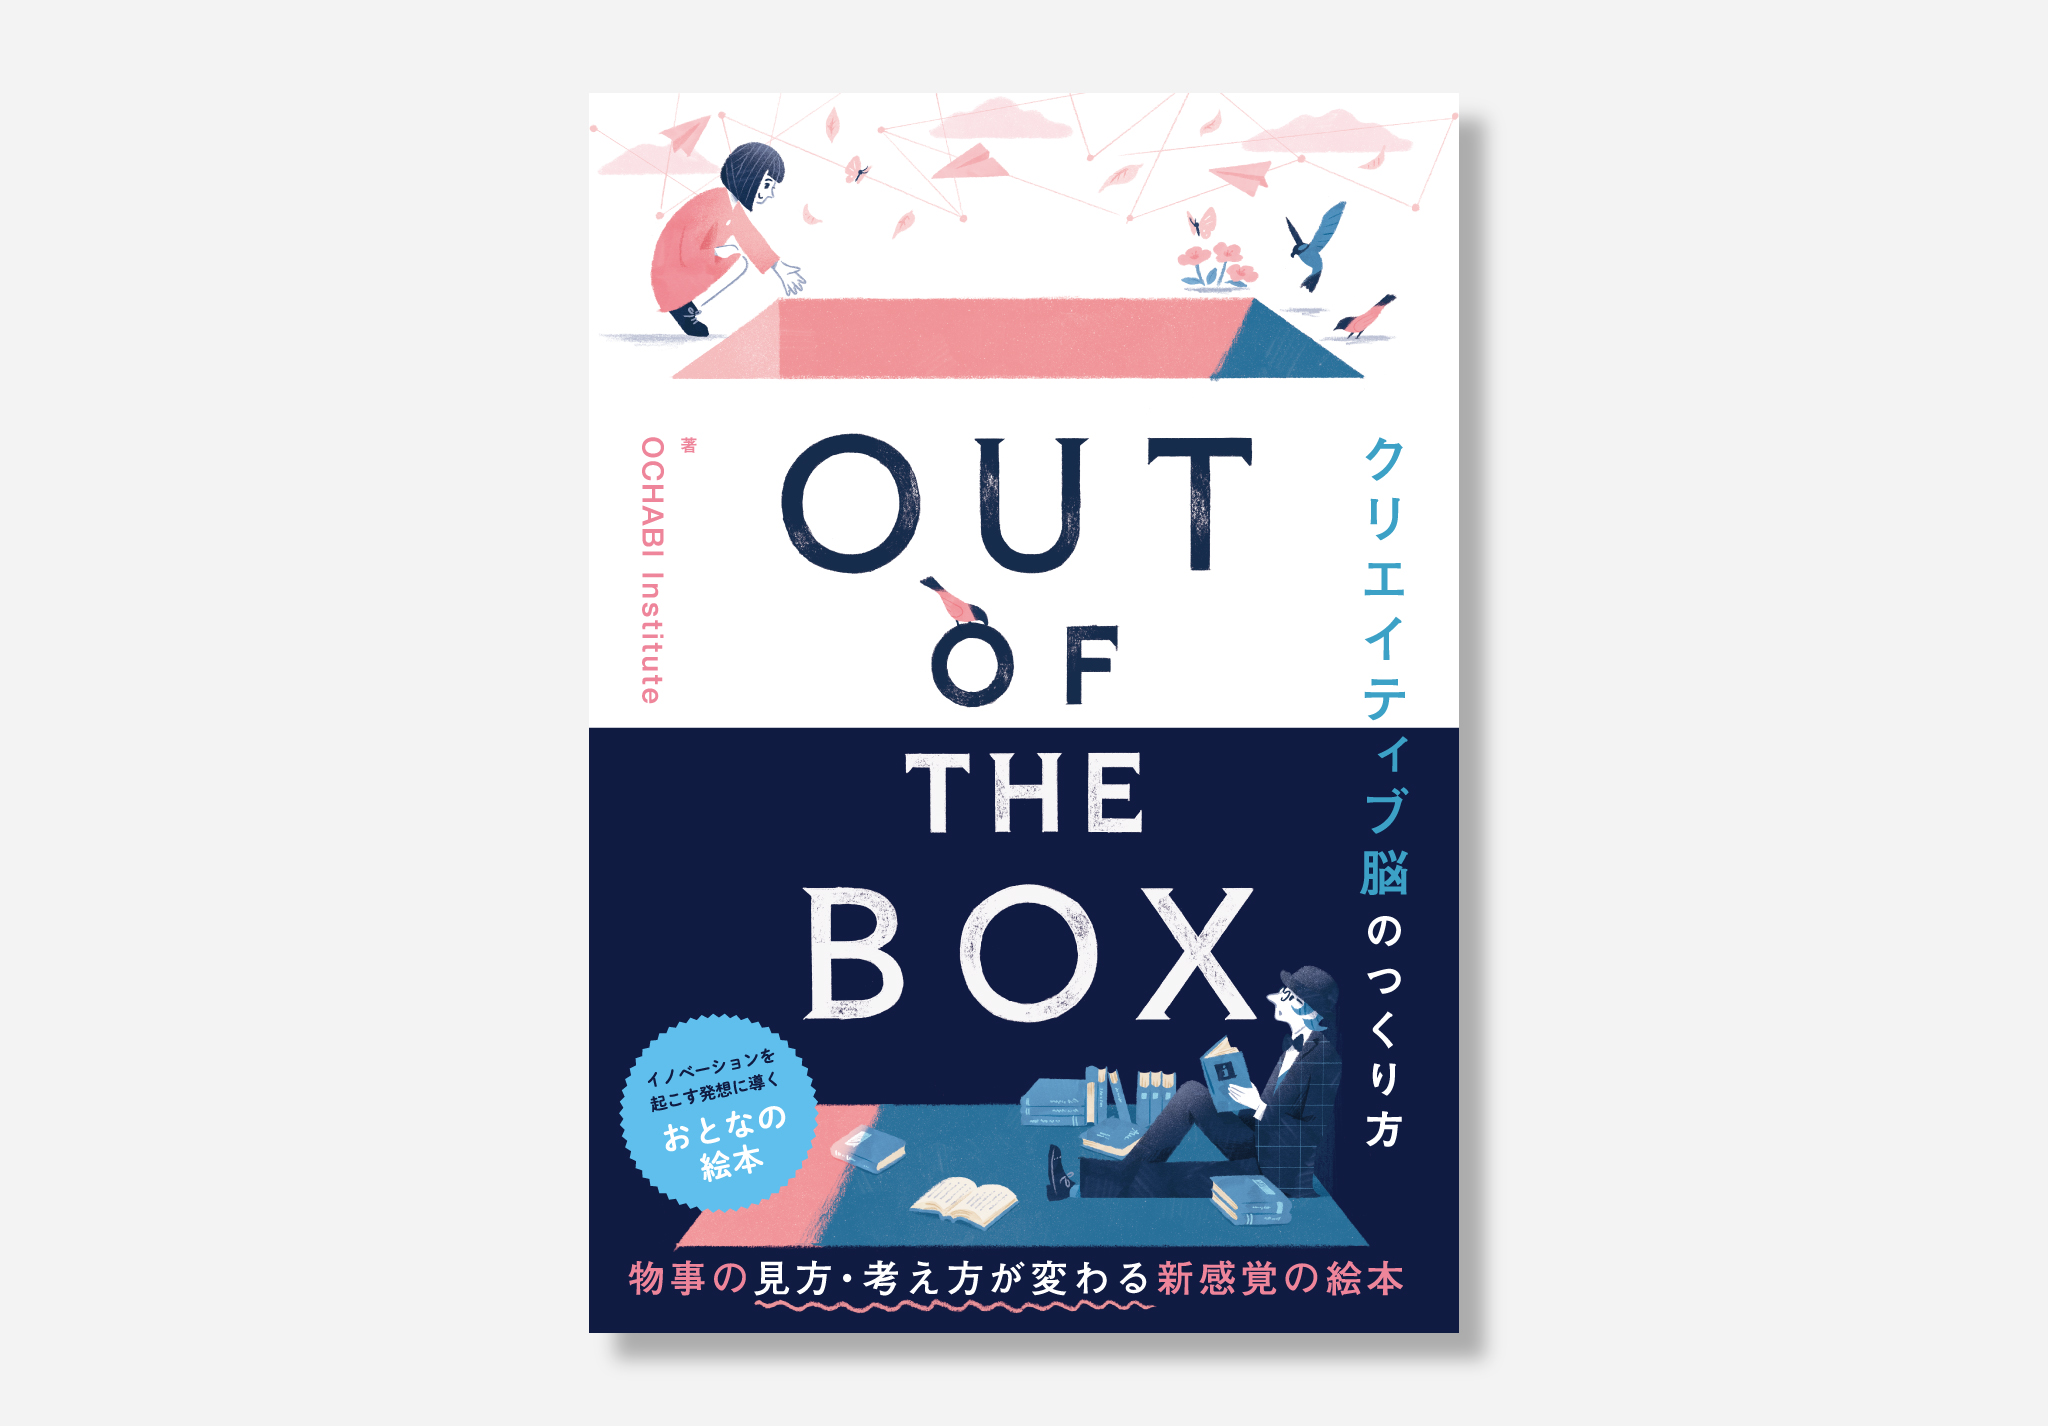 OUT OF THE BOX “クリエイティブ脳のつくり方”　表紙デザイン・挿絵 イメージ1